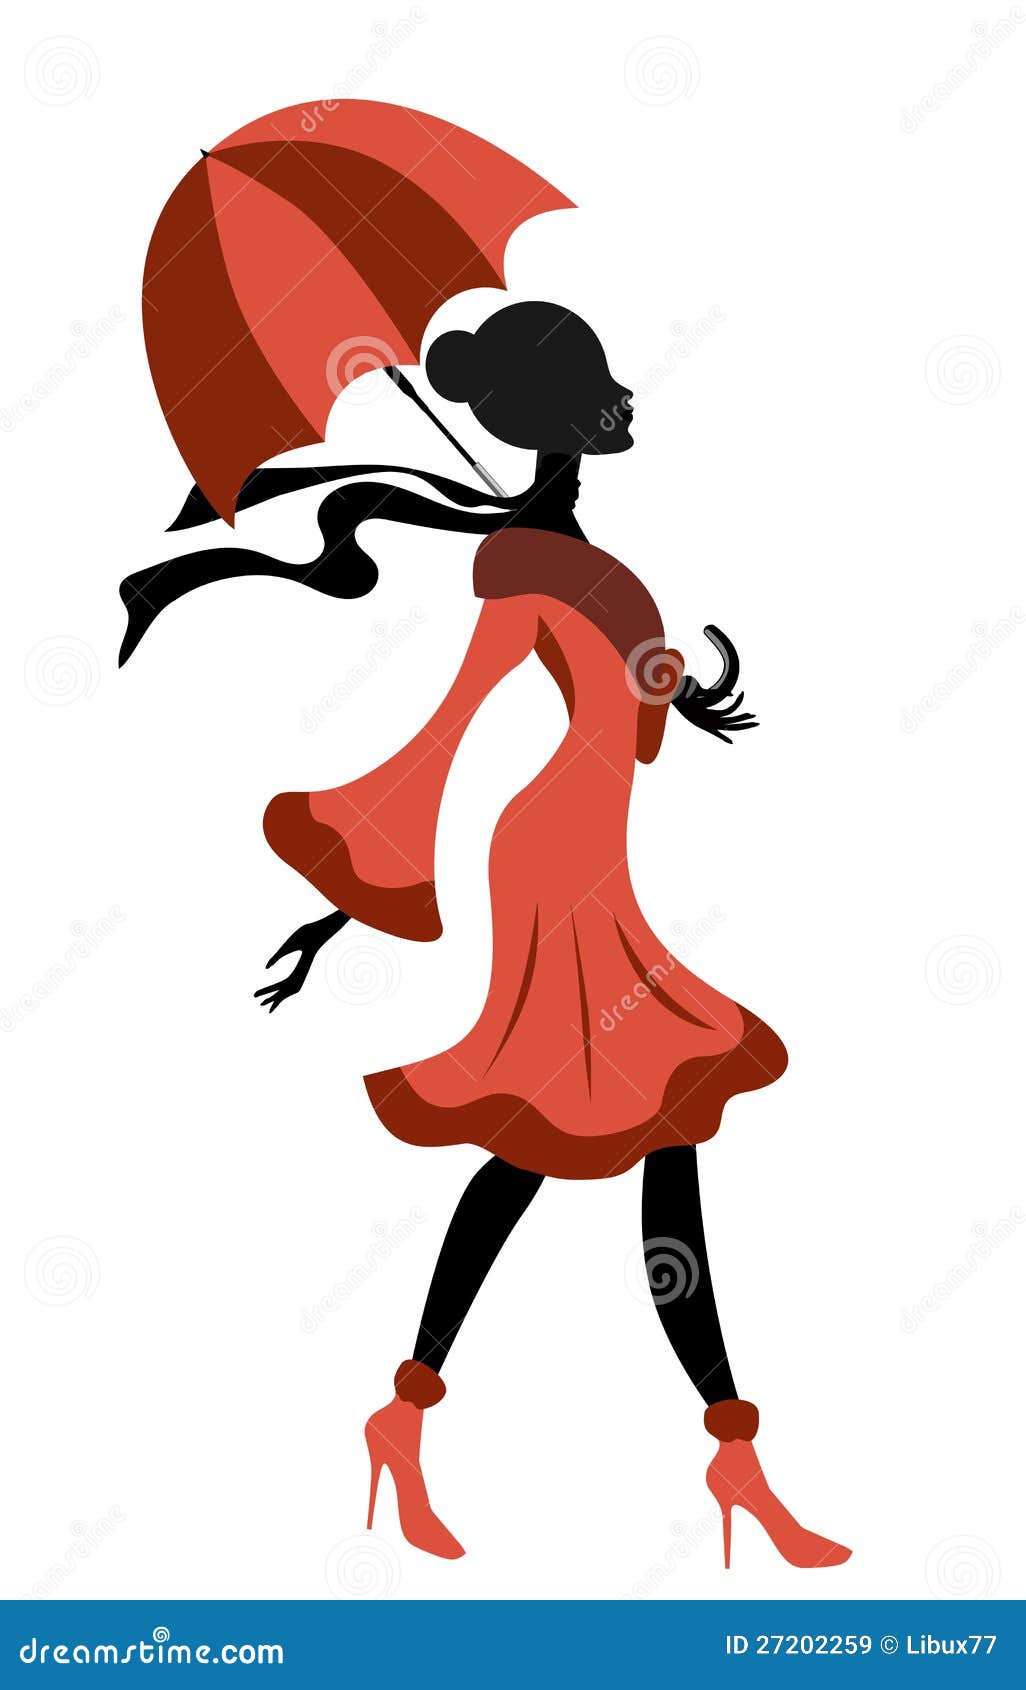 lady with hat clipart - photo #30